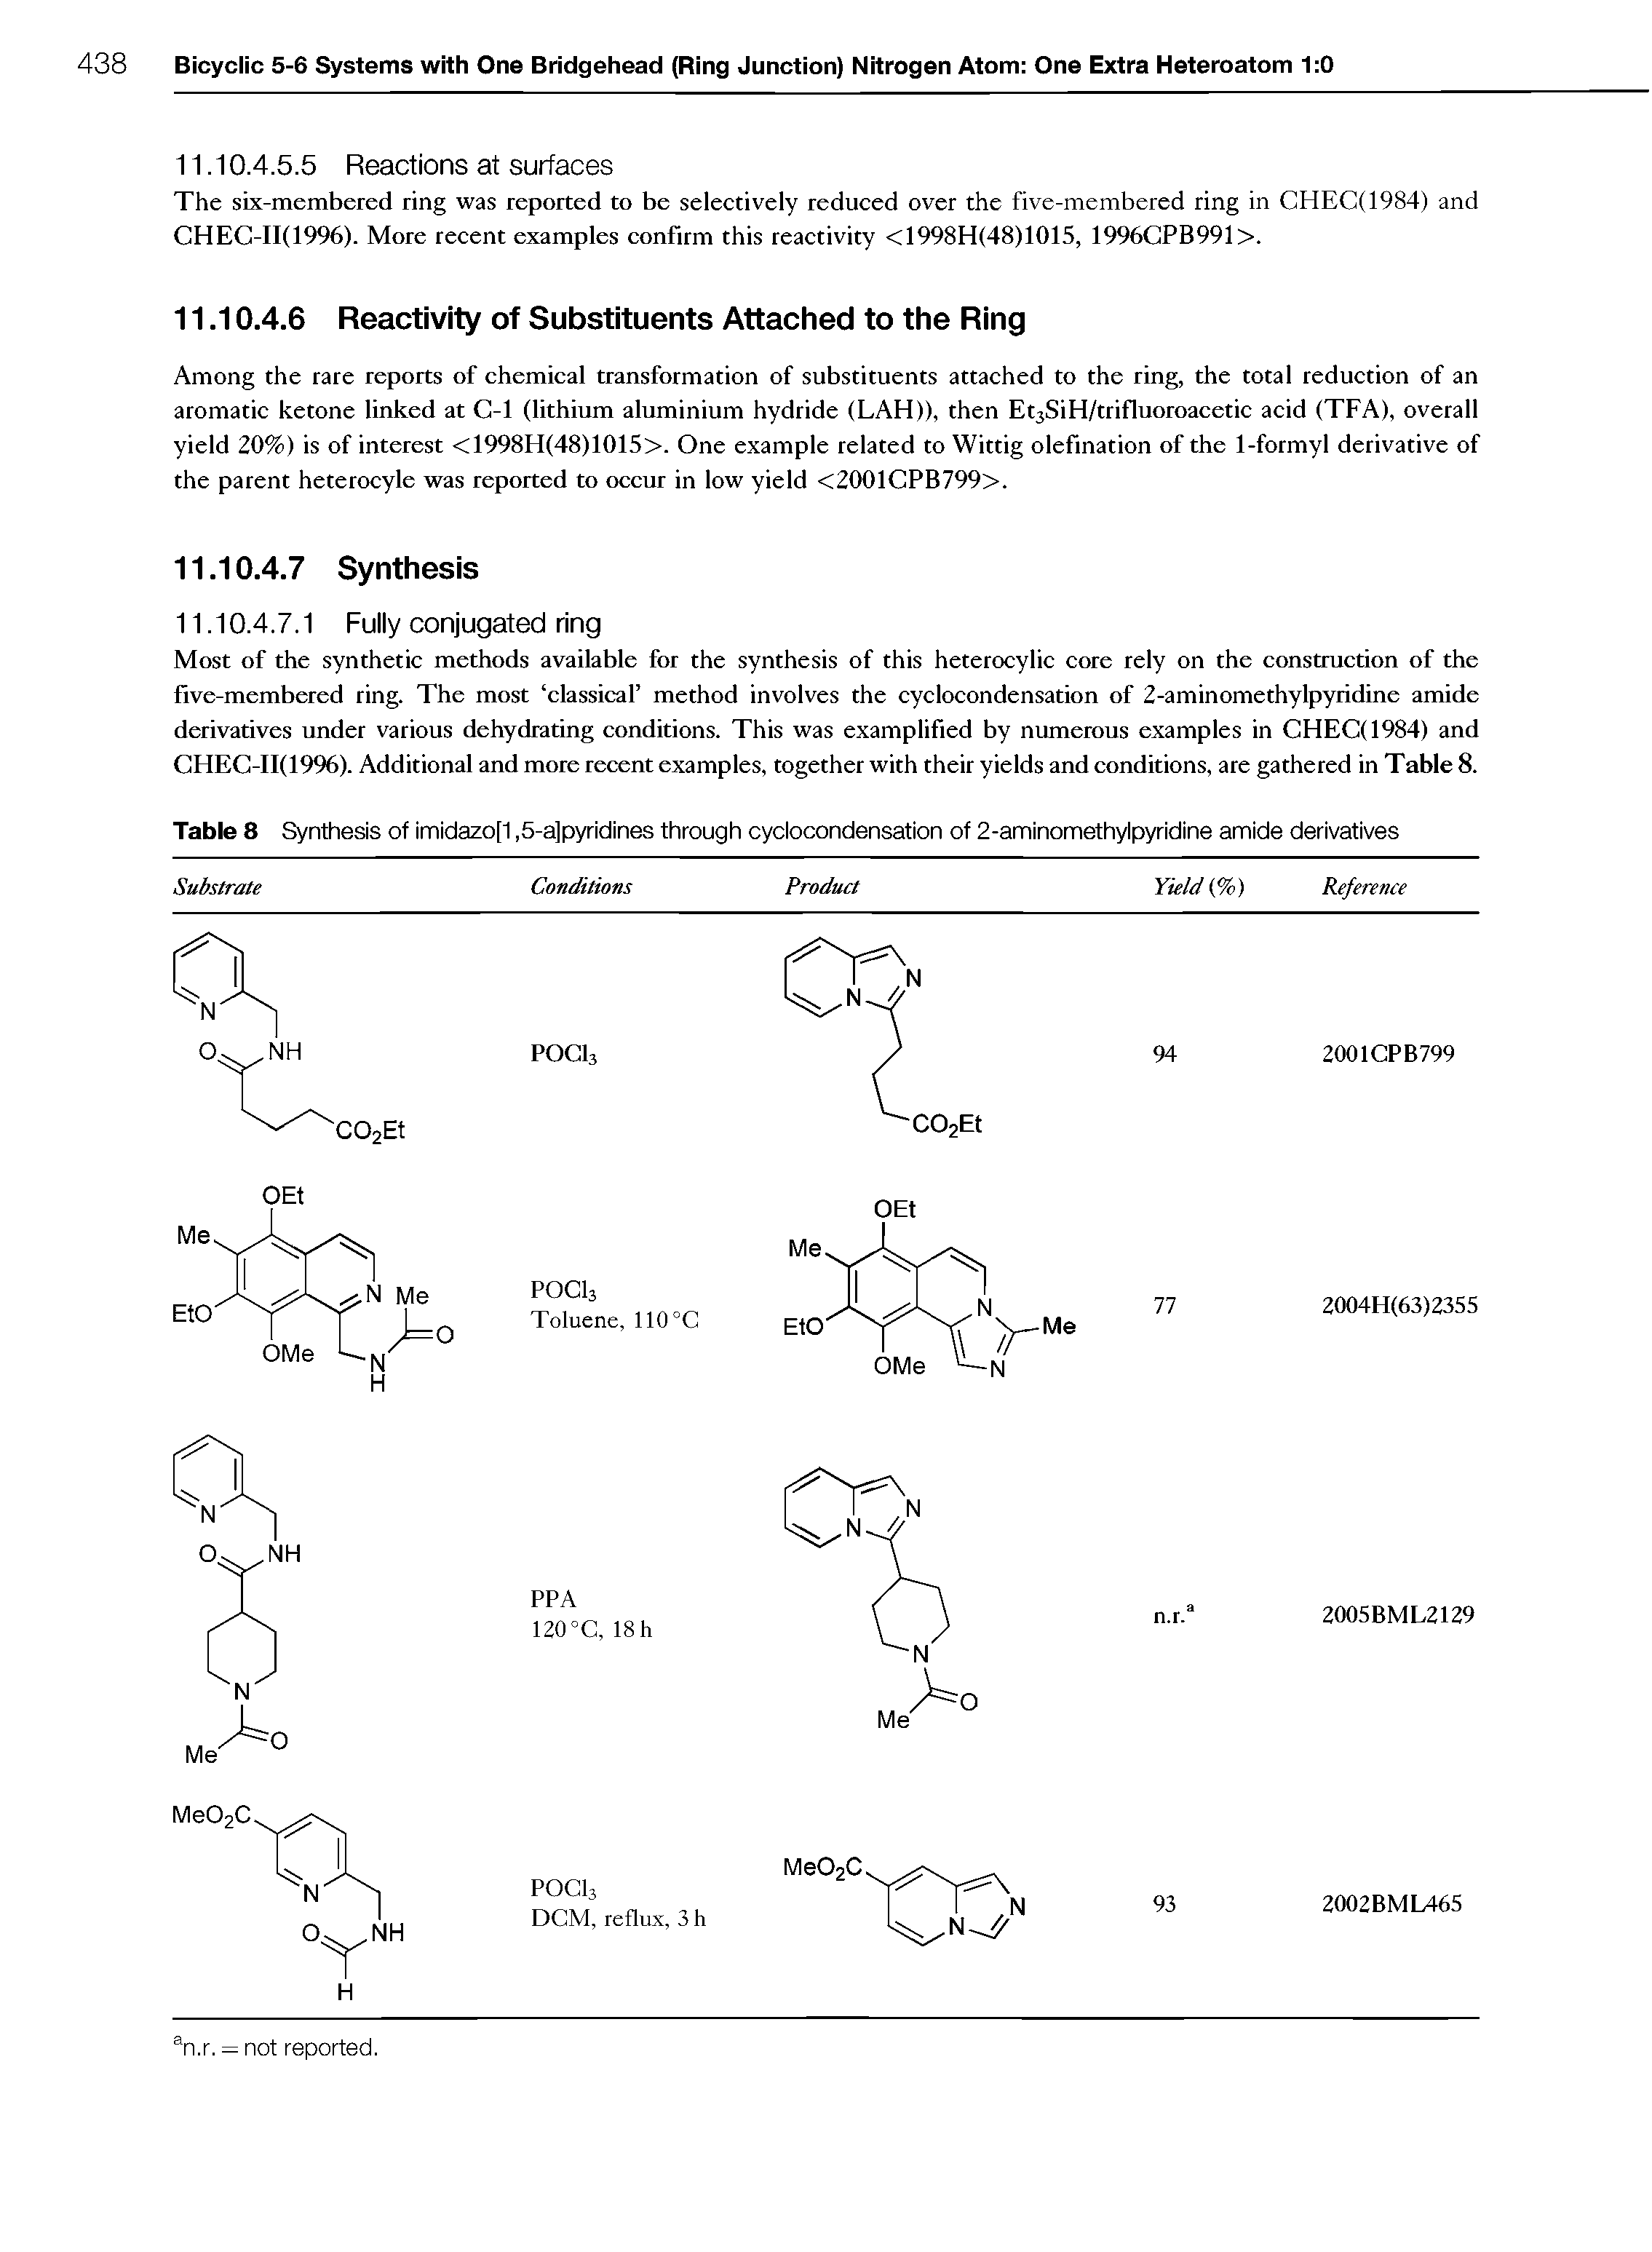 Table 8 Synthesis of imidazo[1,5-a]pyridines through cyclocondensation of 2-aminomethylpyridine amide derivatives Substrate Conditions Product Yield (%) Reference...